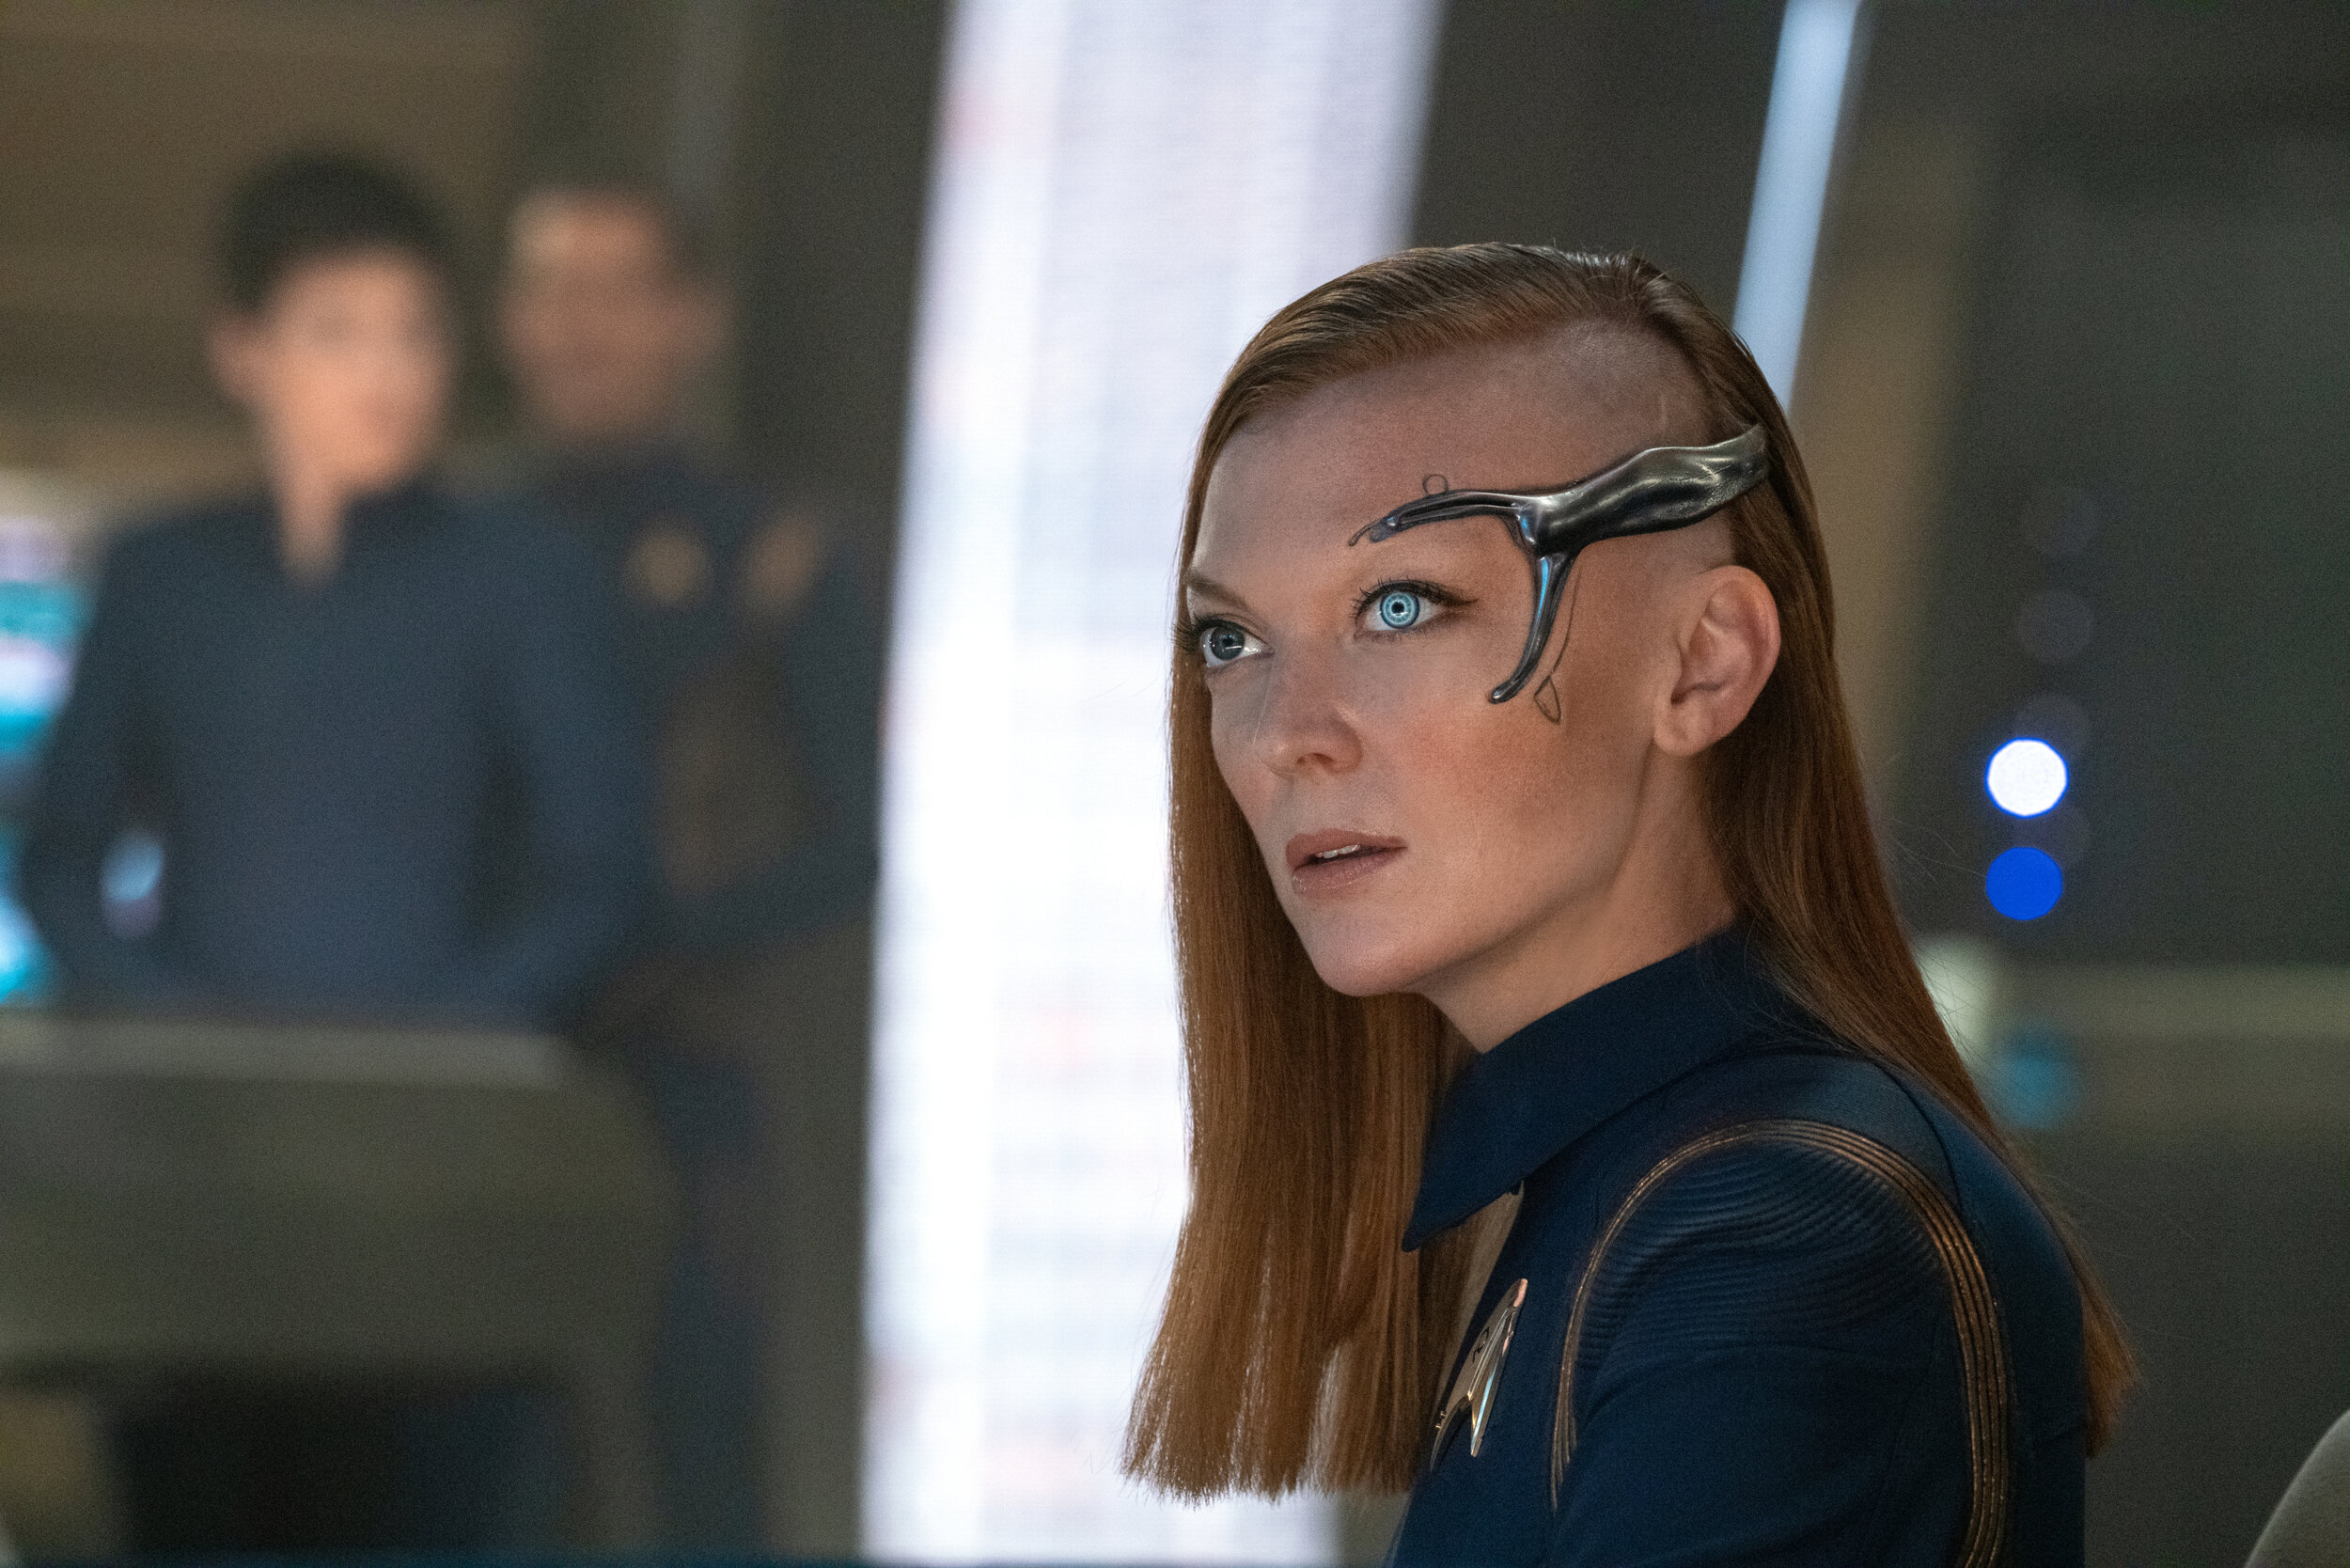   "Die Trying" -- Ep#305 -- Pictured: Emily Coutts as Lt. Keyla Detmer of the CBS All Access series STAR TREK: DISCOVERY. Photo Cr: Michael Gibson/CBS ©2020 CBS Interactive, Inc. All Rights Reserved.  